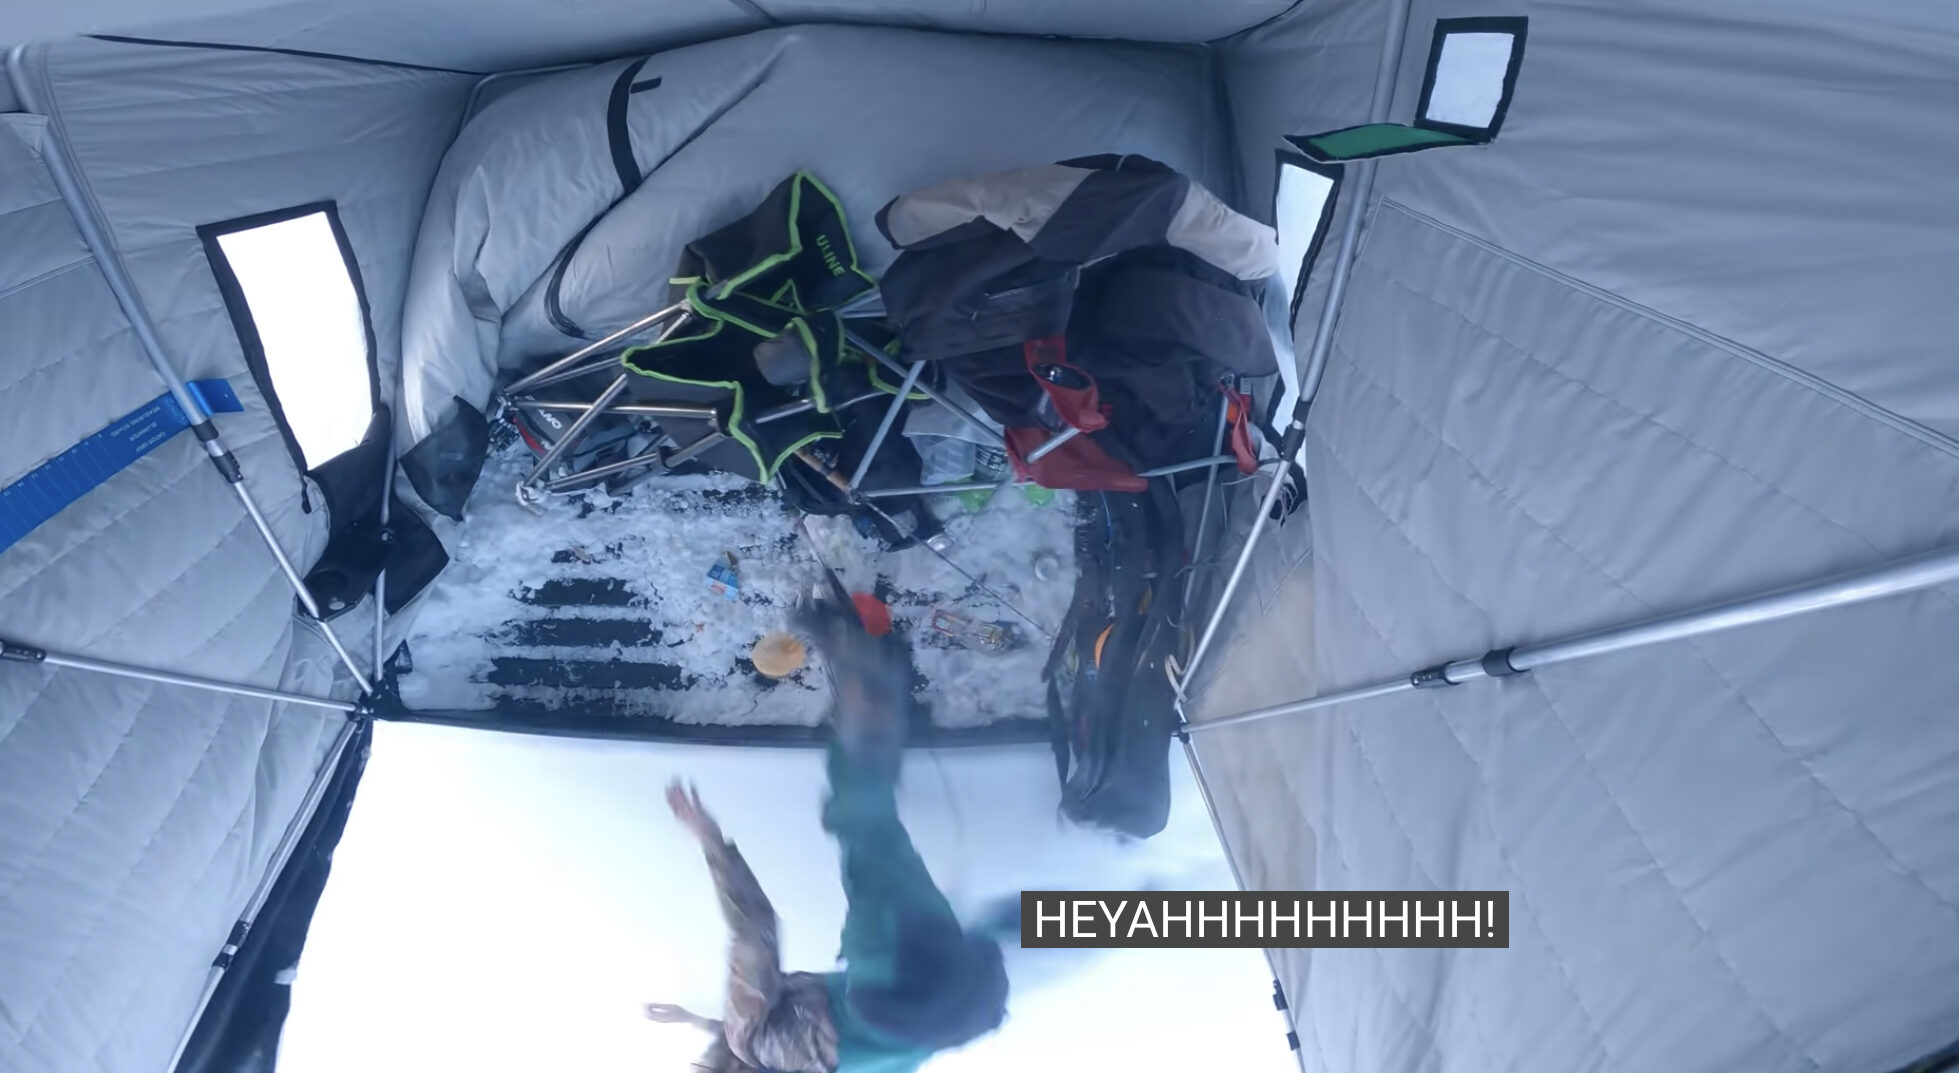 Video: Fisherman and His Shelter Dragged Across the Ice